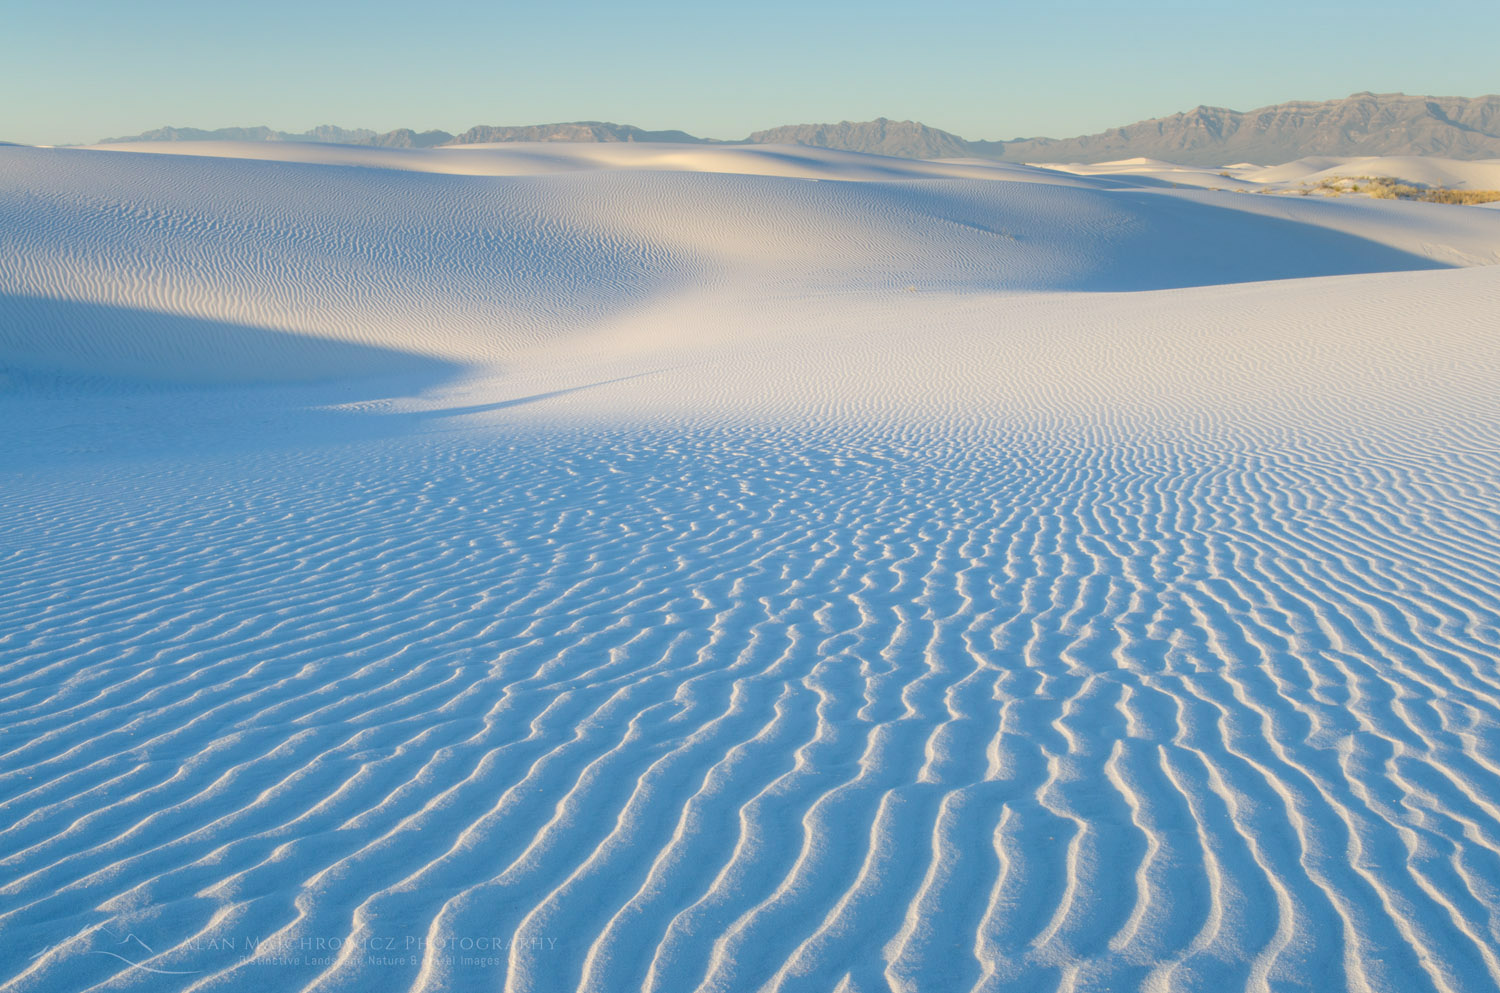 Ripple patterns in gypsum sand dunes, White Sands National Park New Mexico #57034